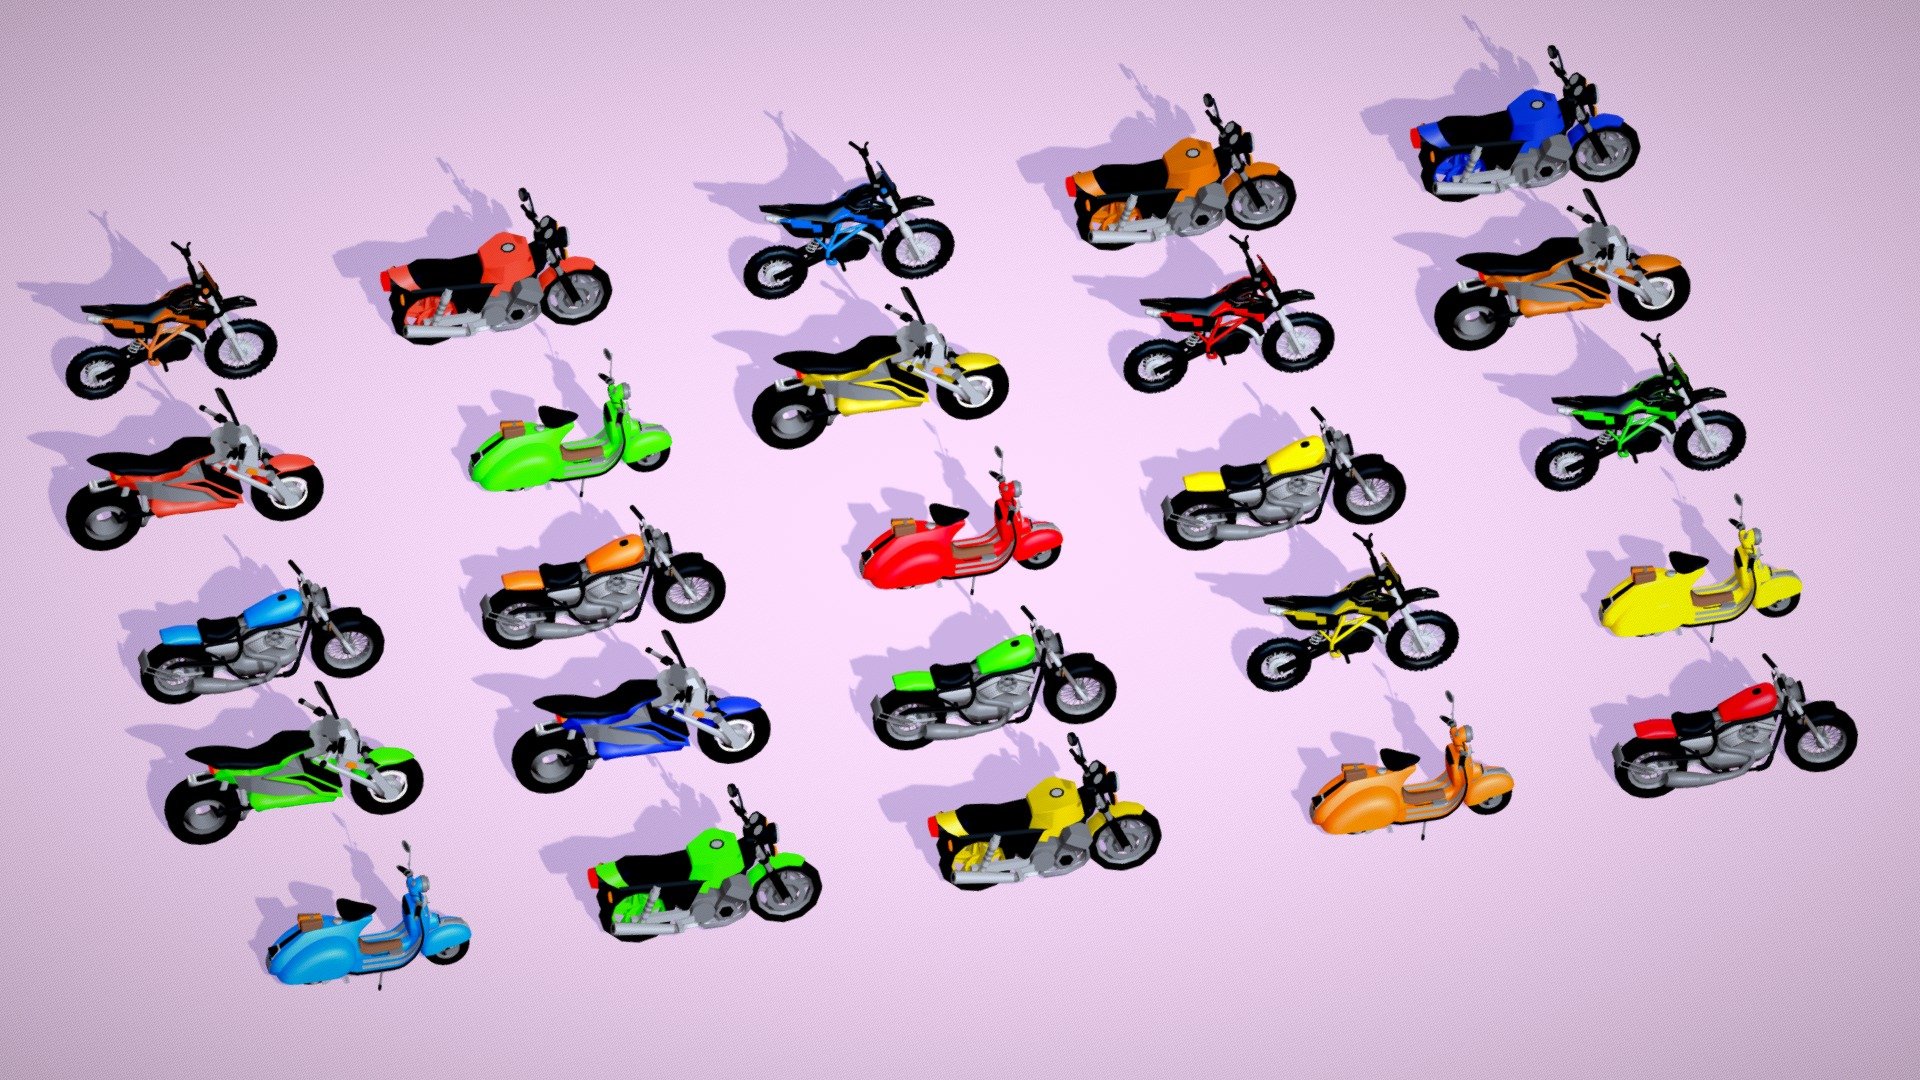 Created 25 very nice Bikes in a single pack. All the models are originally prepared in Blender. The package includes the following file formats: Blend, Glb, Obj

You can export any file format from the source blend file.
Materials are used to make these vehicles colorful. You can also make the many color variant of your choice by changing the colors in the material.

Enjoy this Bike Two Wheeler pack. If you like it then add comments below 3d model